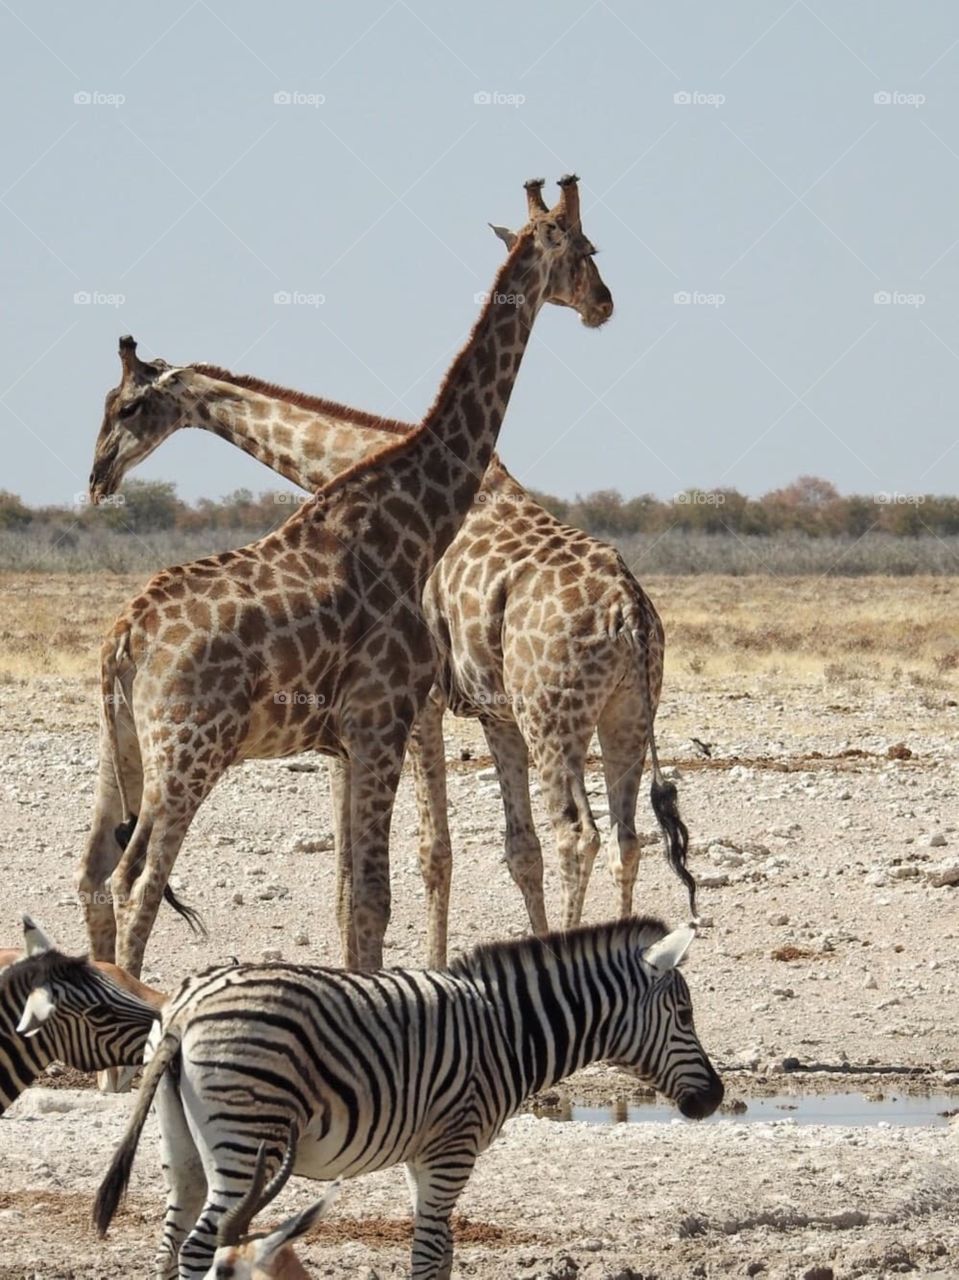 Giraffe and zebra at the waterhole at Namibia’s  Etosha National Park. It was really hot and dry during the day, but freezing cold at might. Another very happy place in South Africa